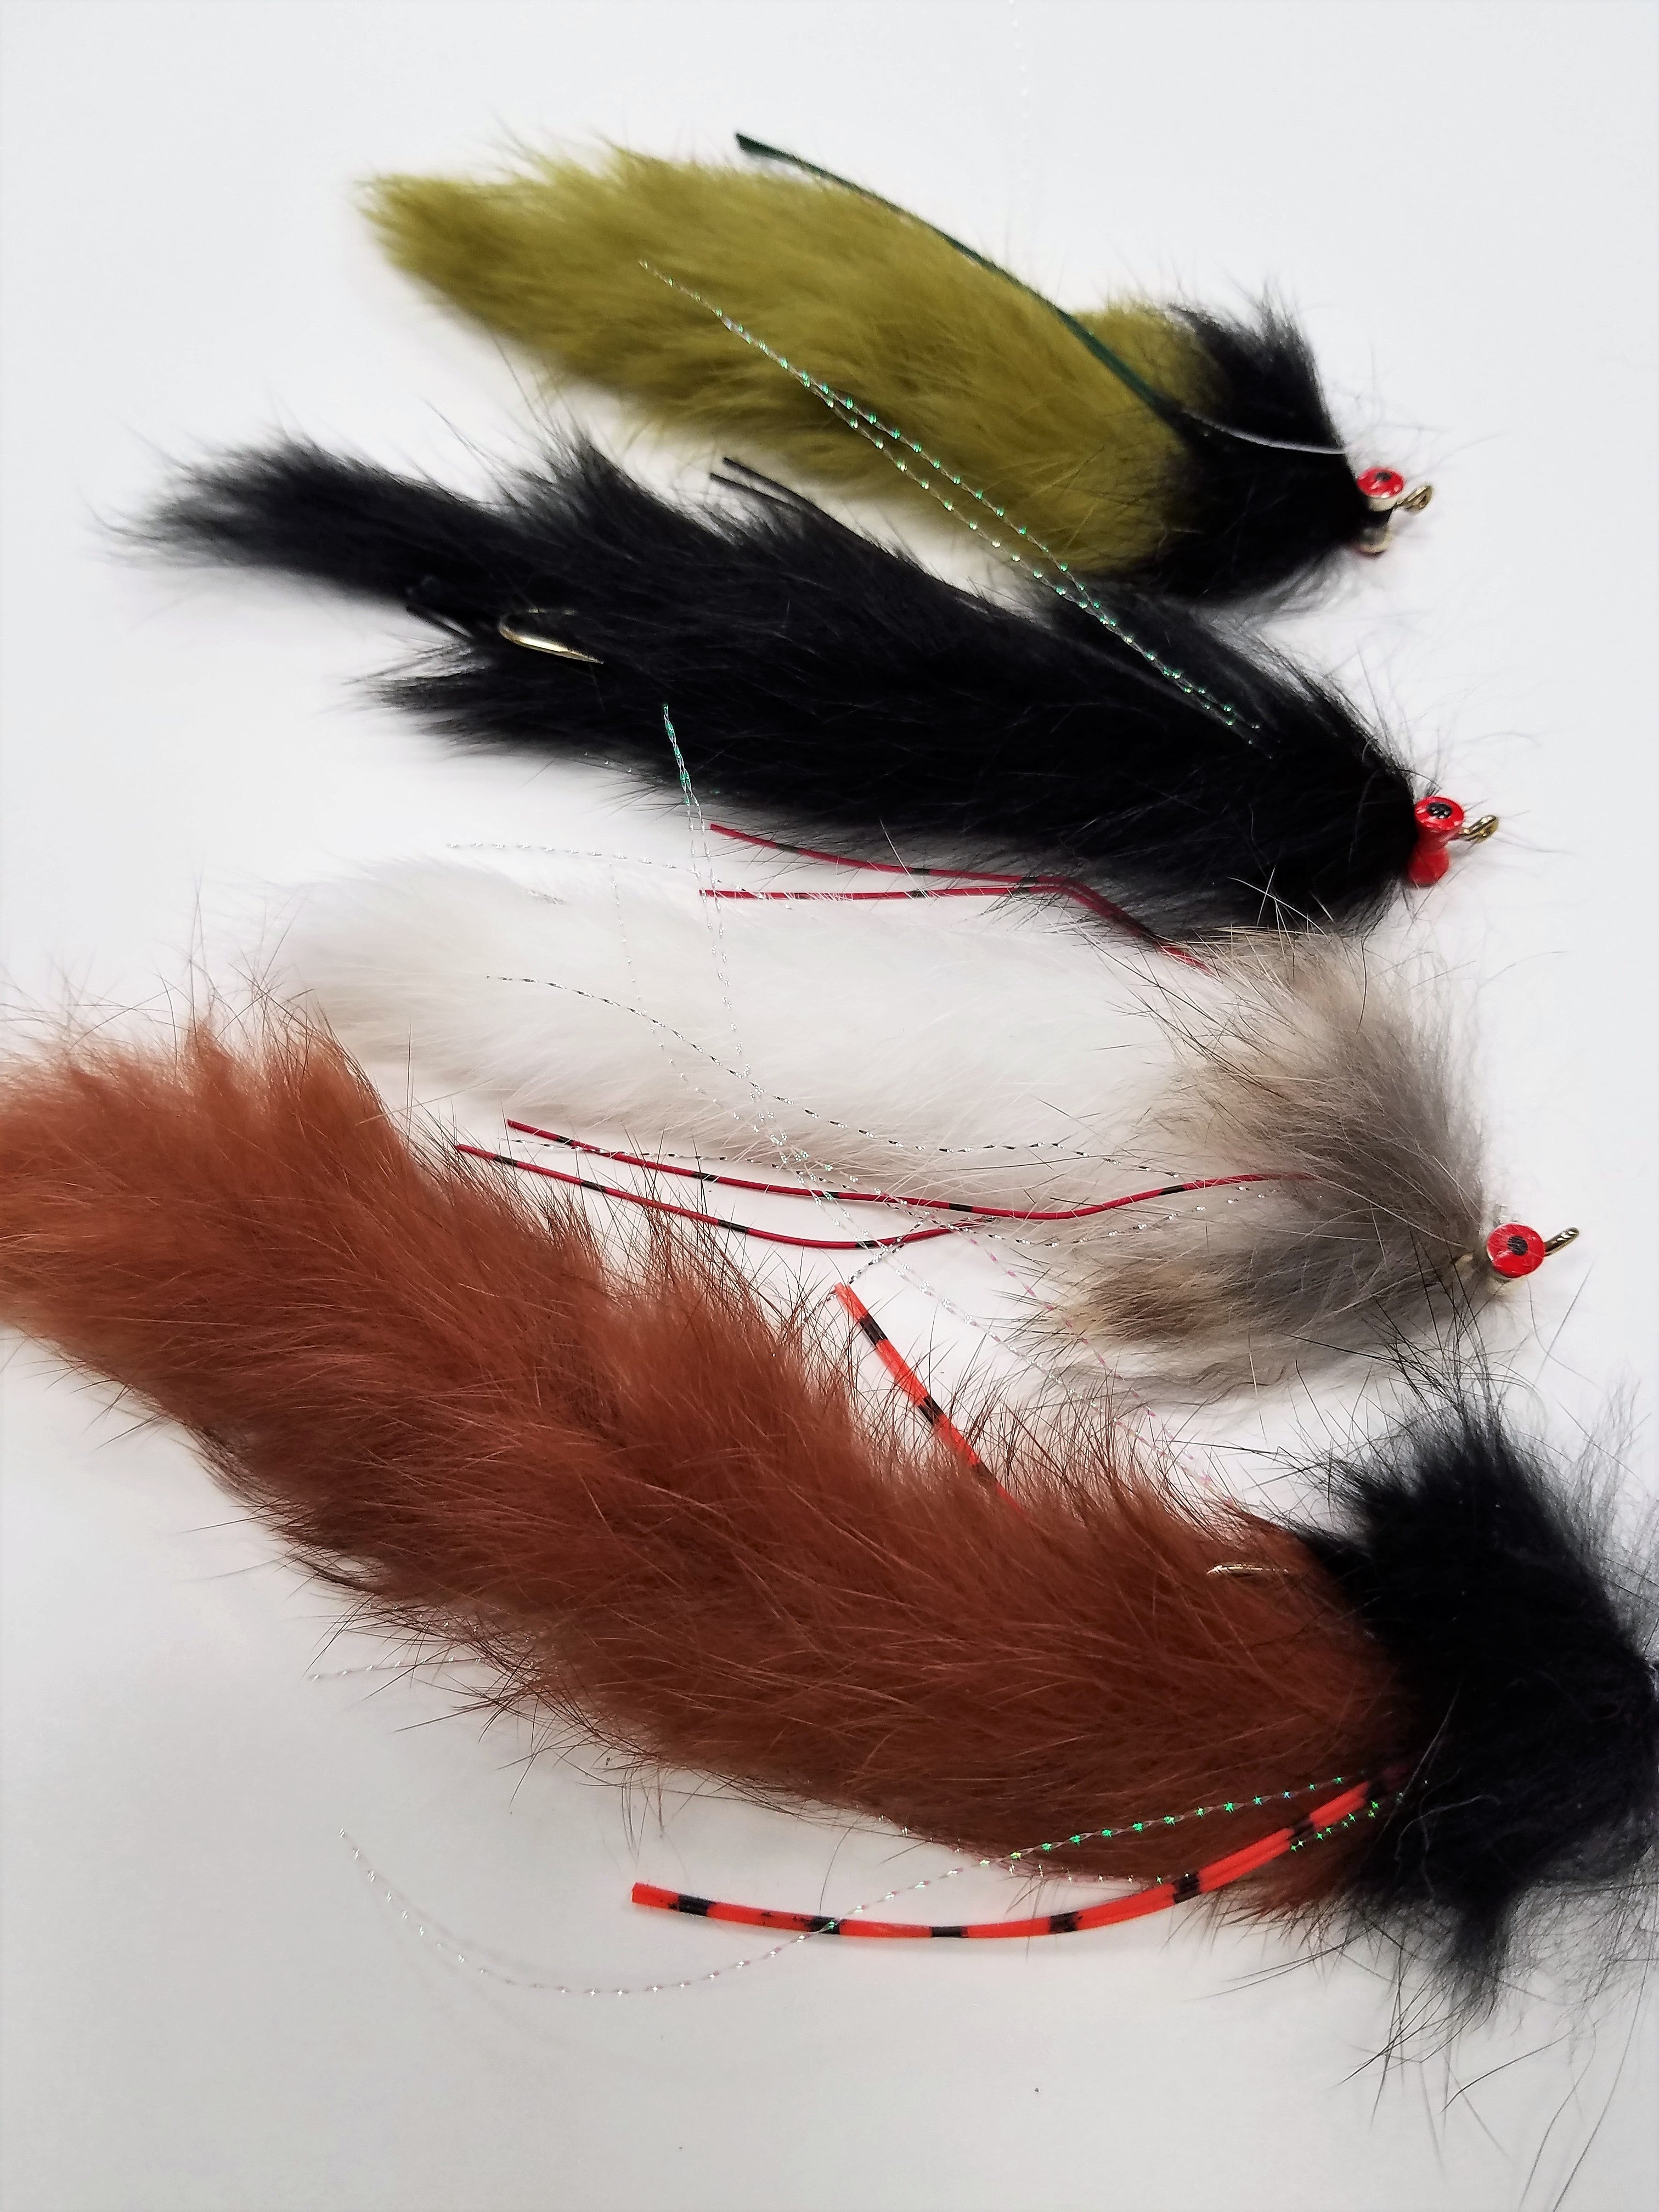 Upper Delaware Chew Toy Selection - 4 Streamer Flies, String Leeches ...